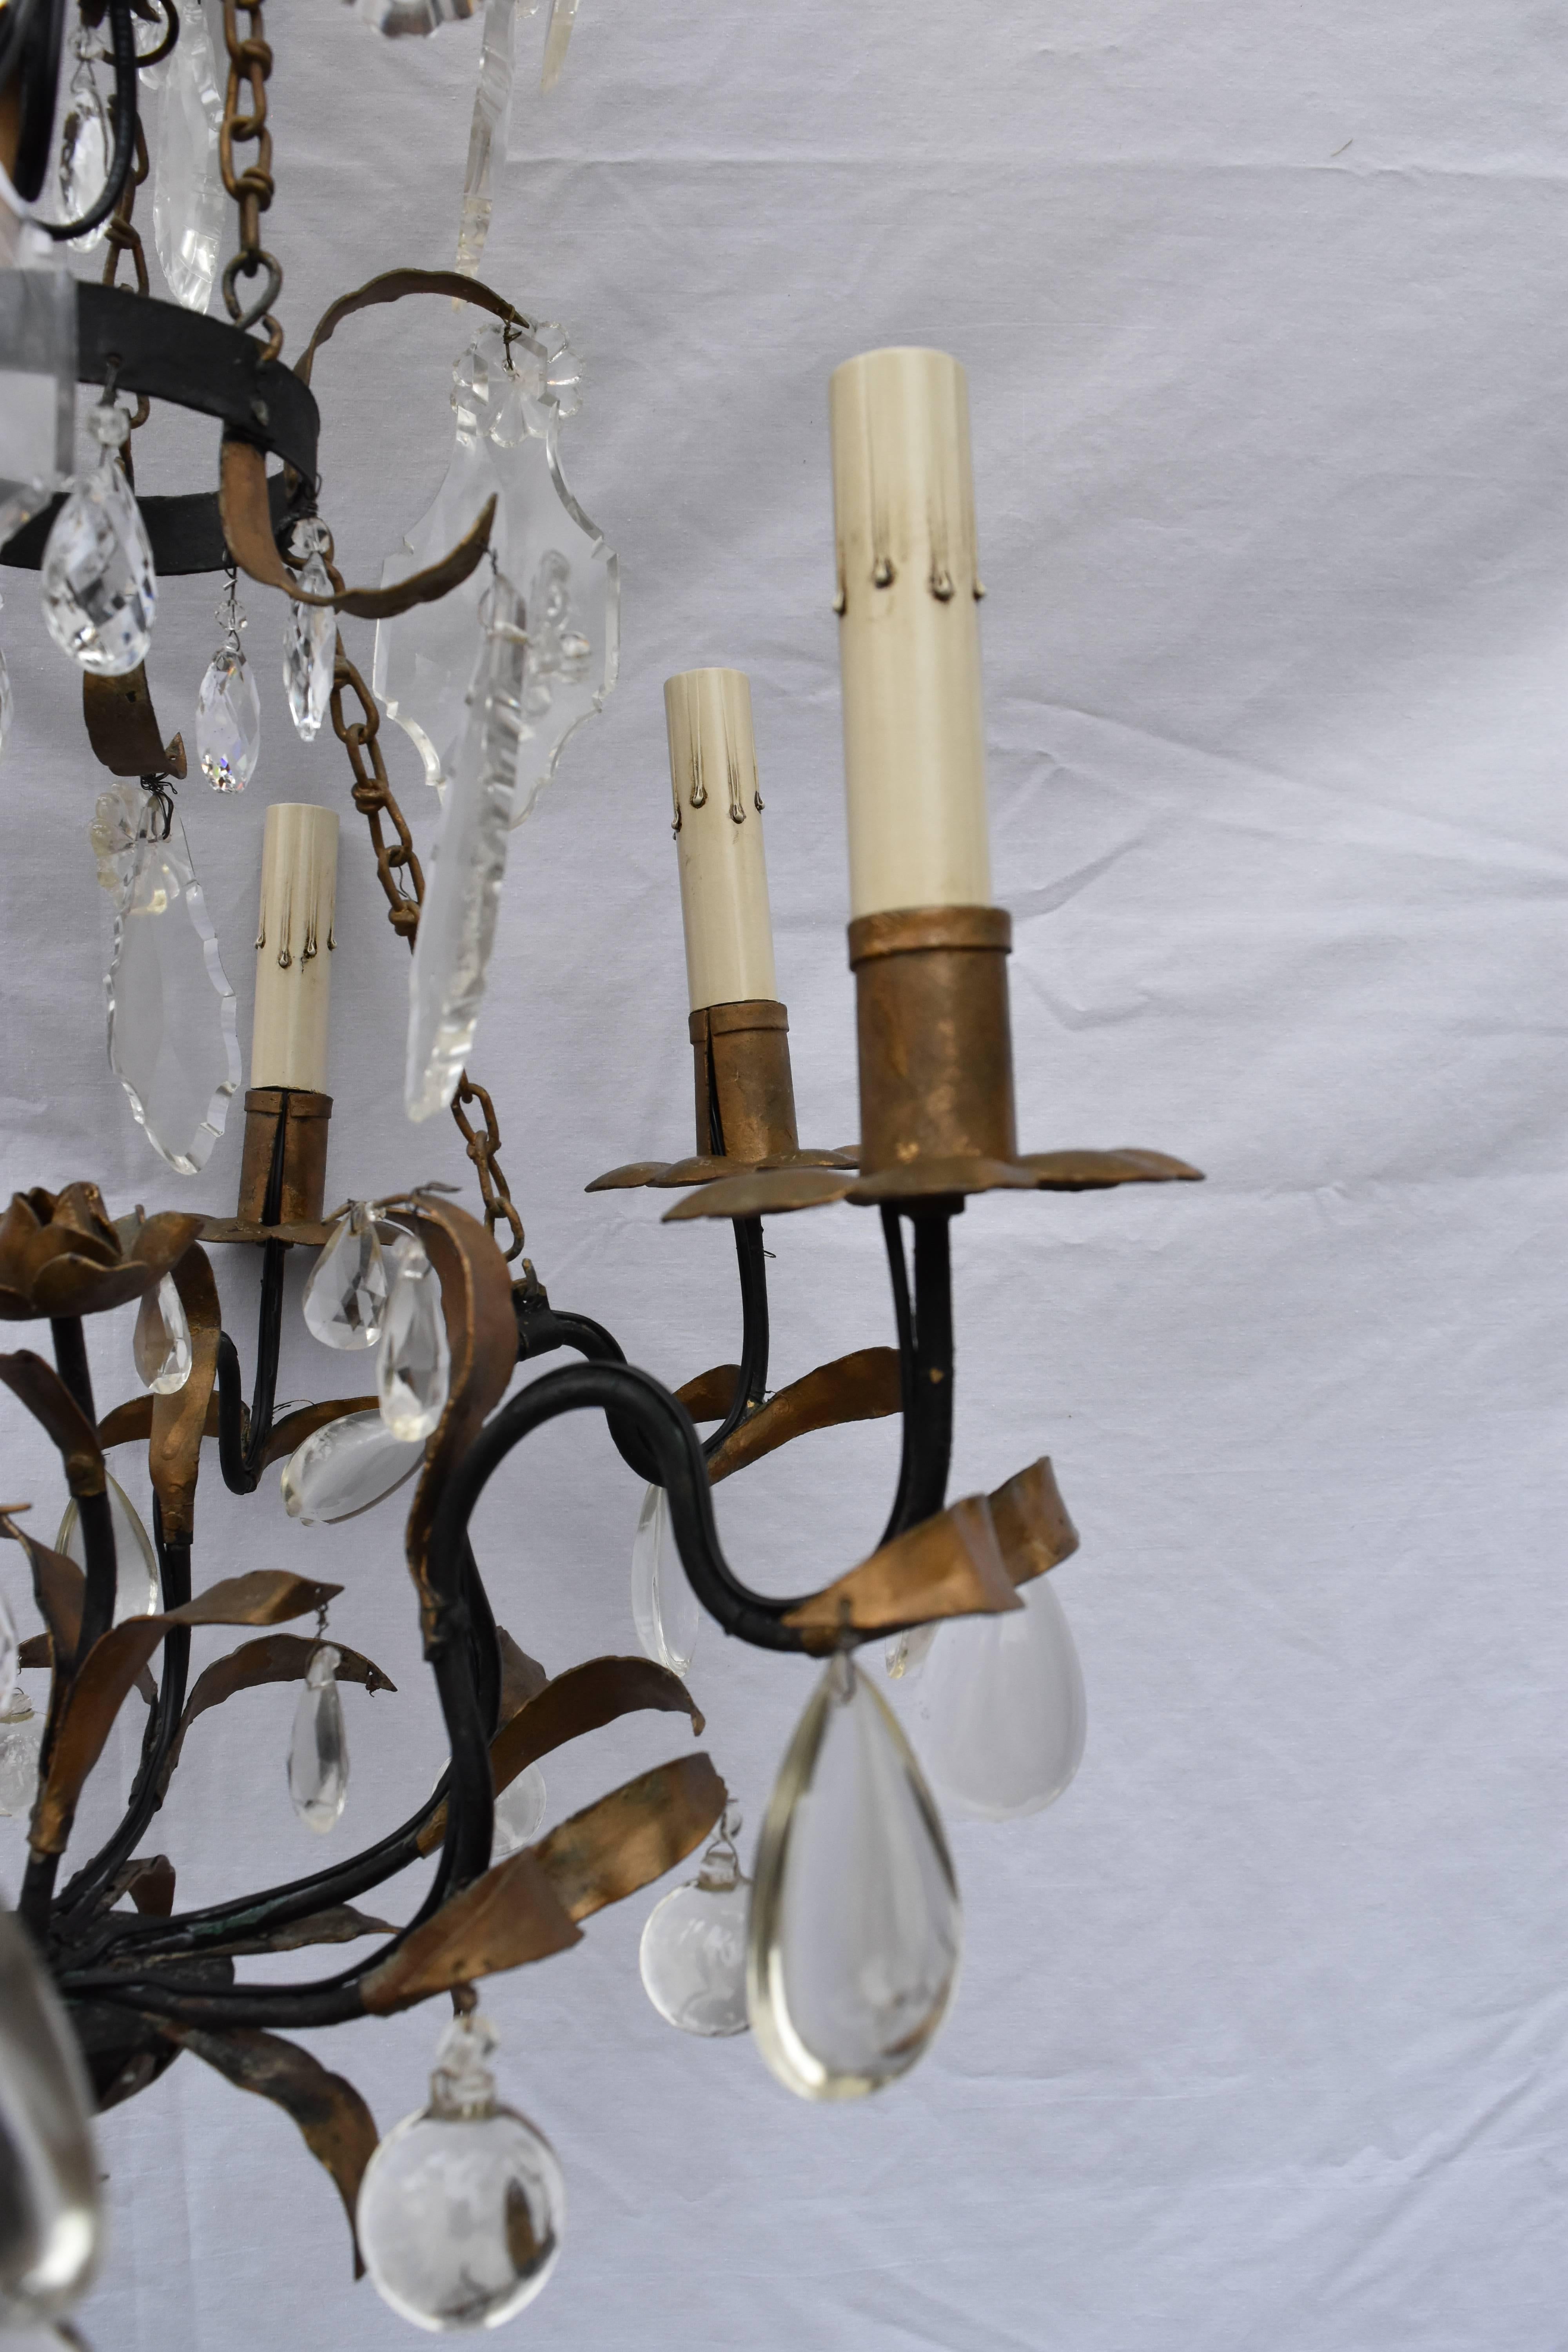 This French crystal and iron six-arm chandelier has a bronze and gilt finish with leaves embellishing the arms and a rose coming up through the centre. It has been newly rewired and cleaned.